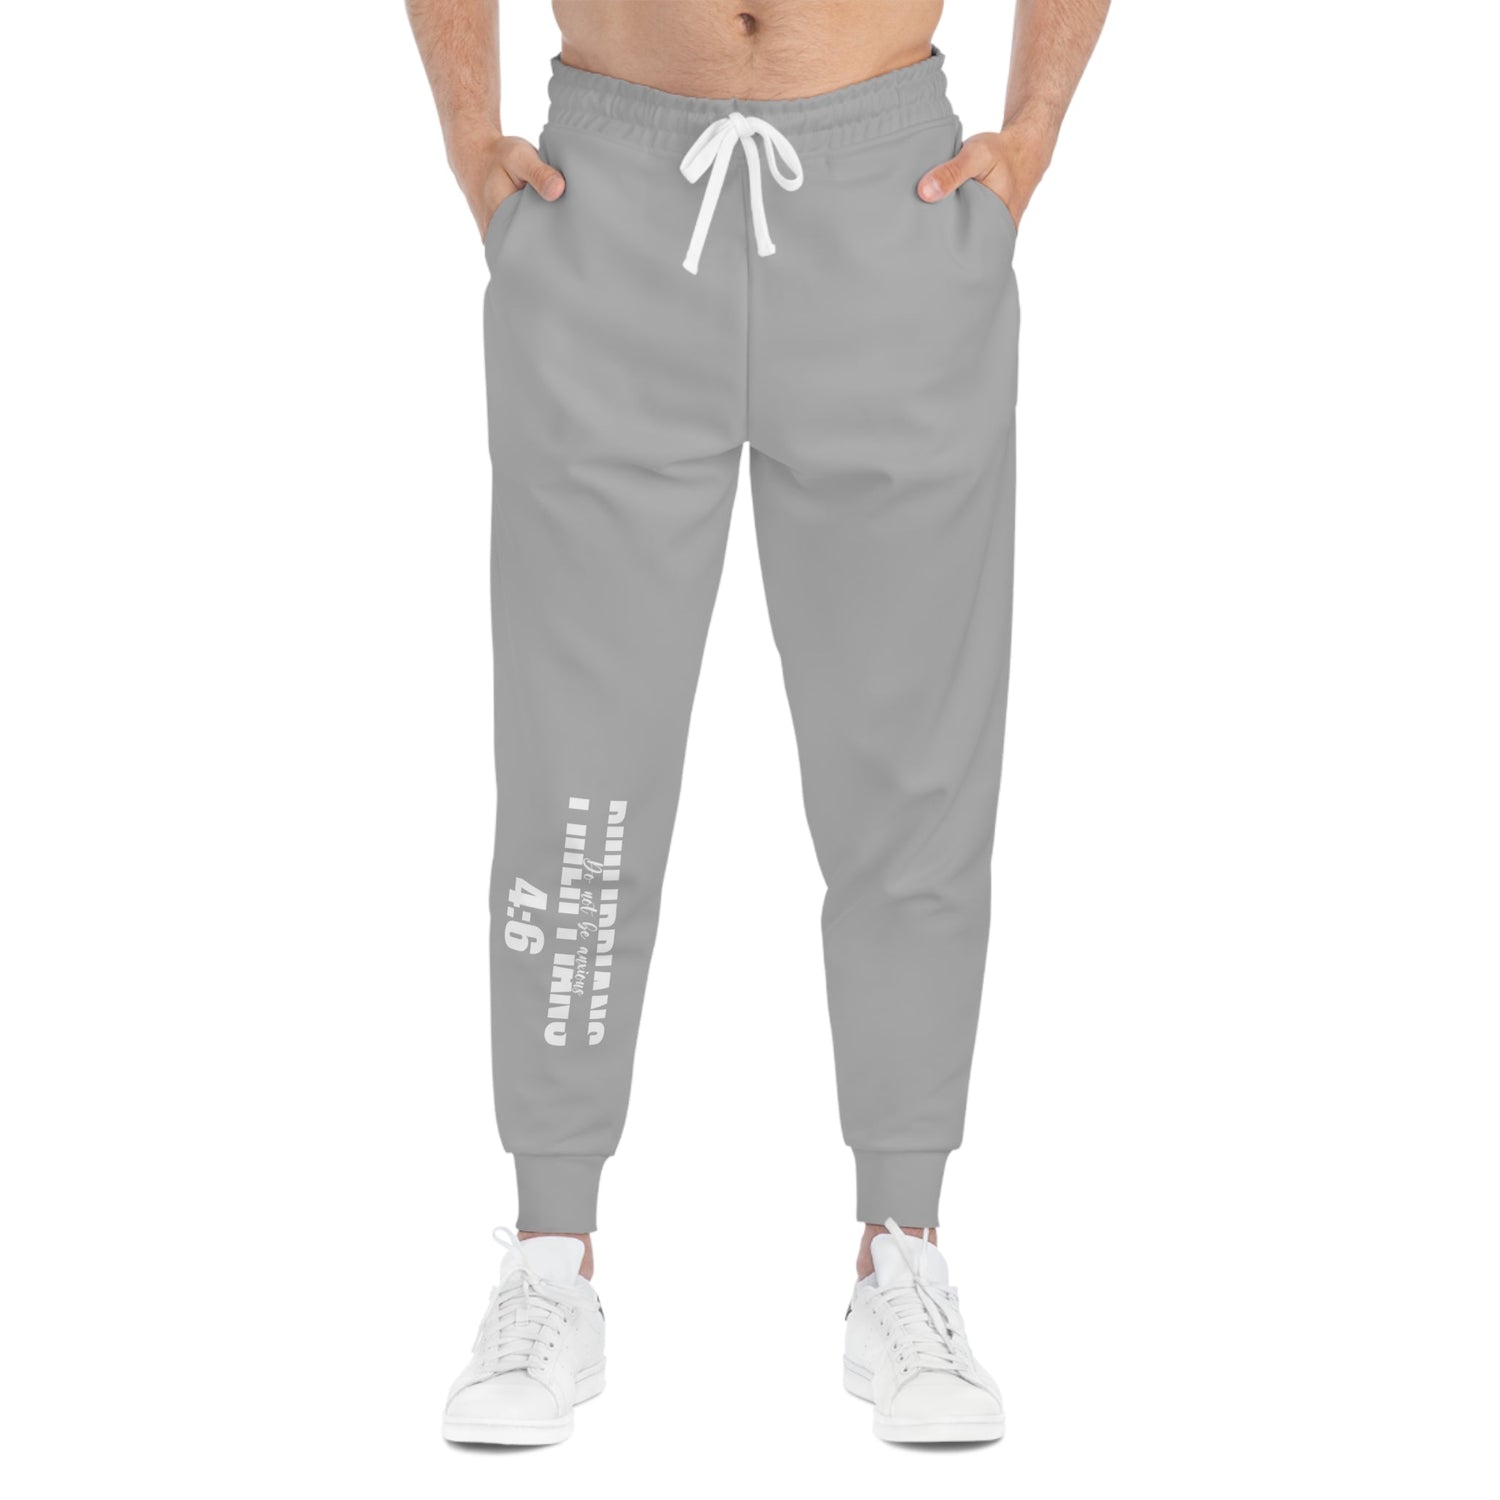 Do Not be Anxious Gray Unisex Athletic Joggers-All Over Prints-Wear What Inspires You